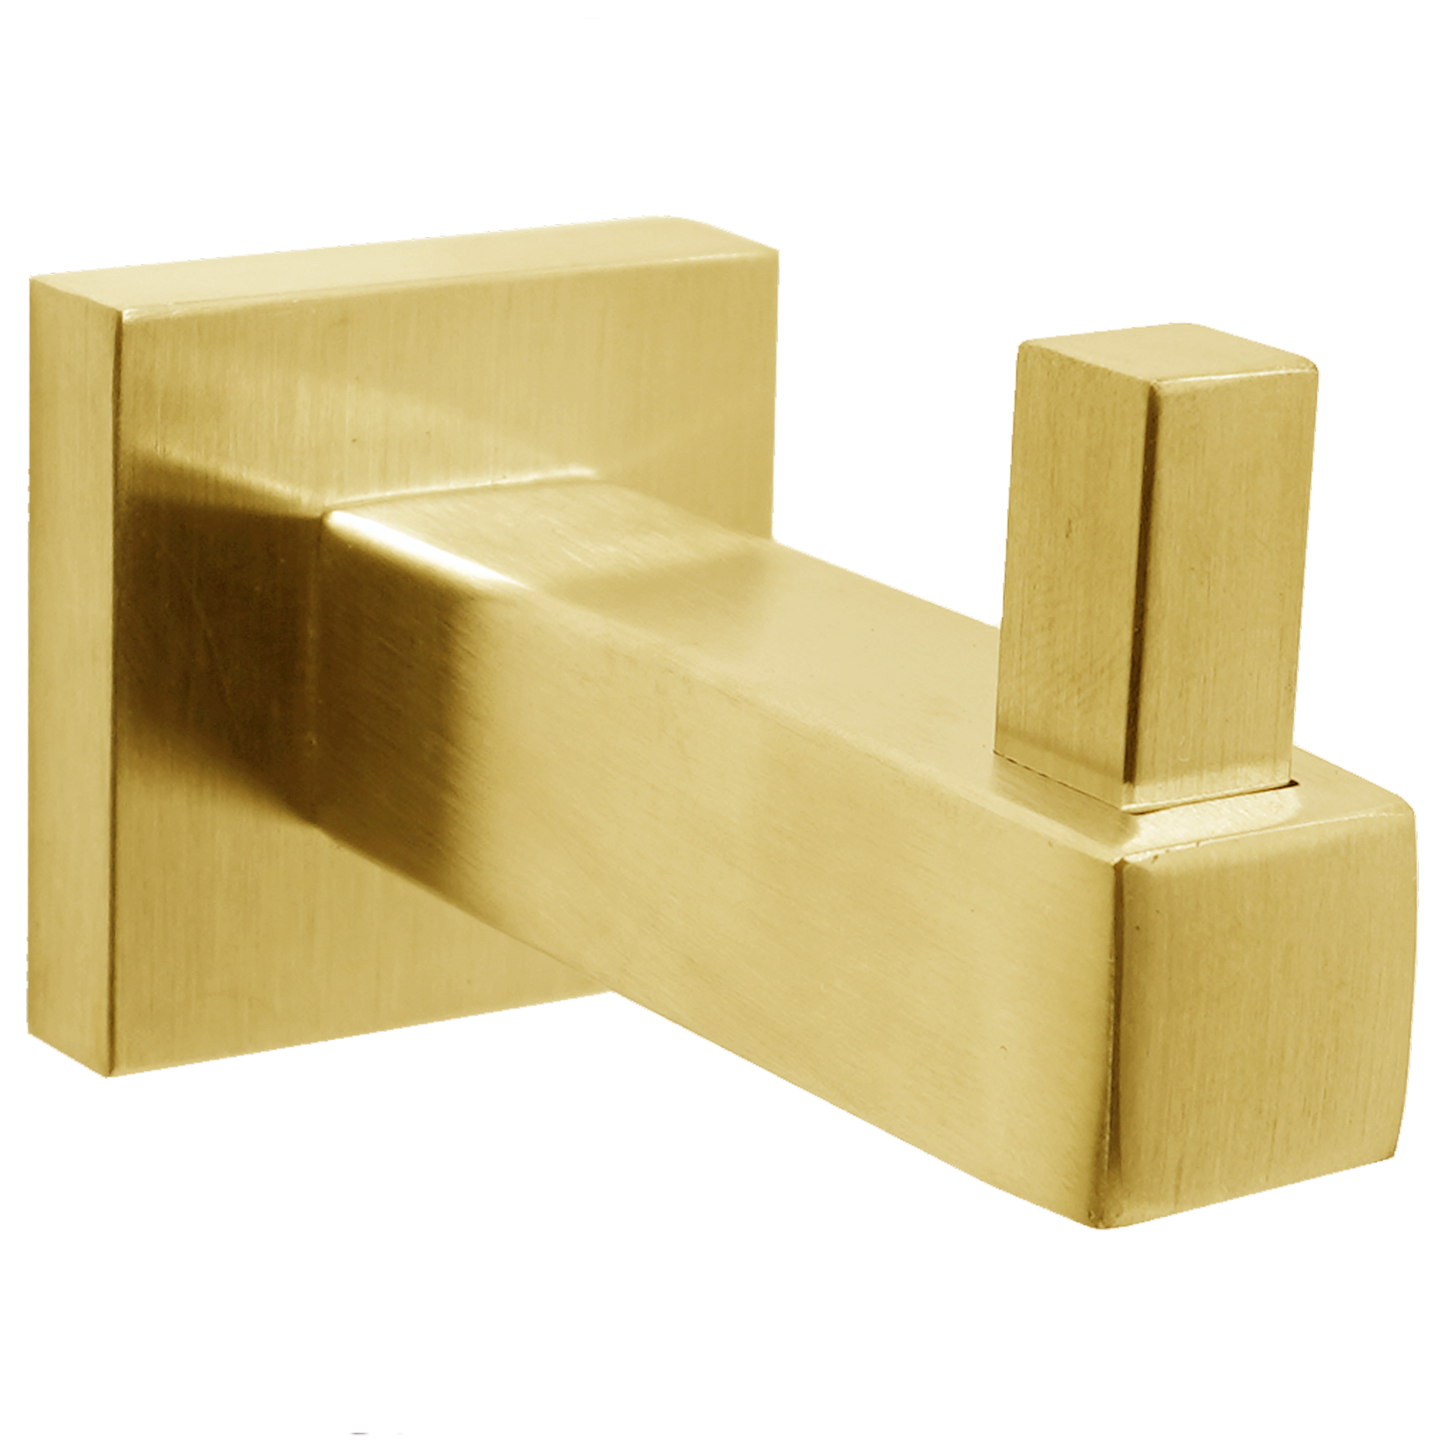 CHS-34 Surface-Mounted Single Coat Hook, Square Style in Satin Gold